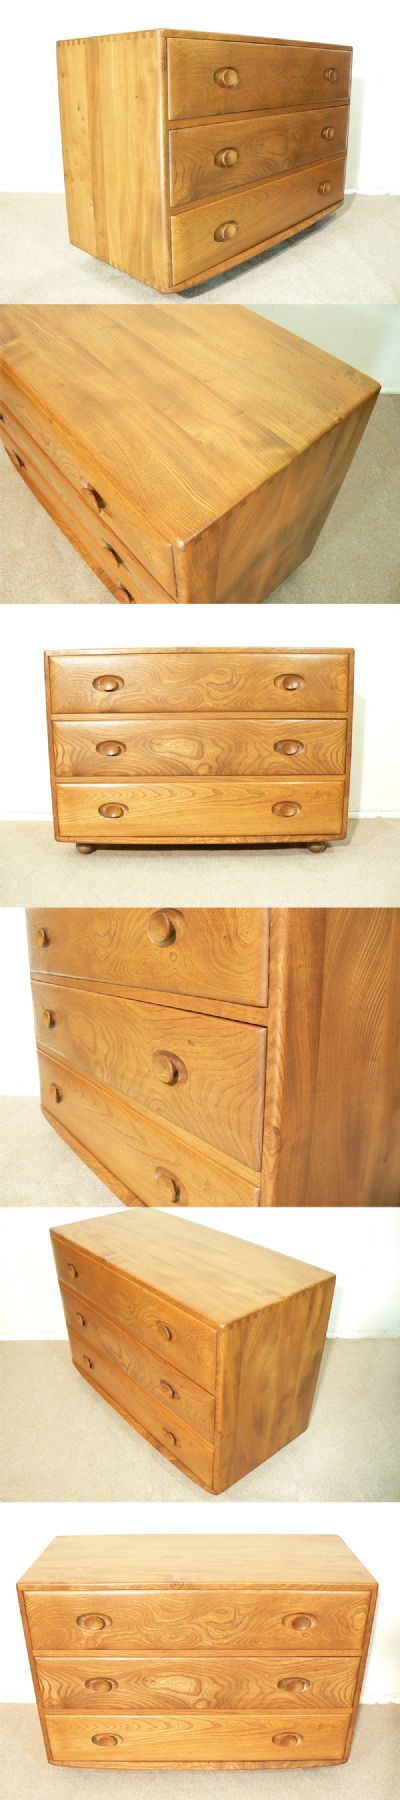 An Ercol chest of draws, c1970s. Highly figured elm grain throughout, stunning. One of a pair available.